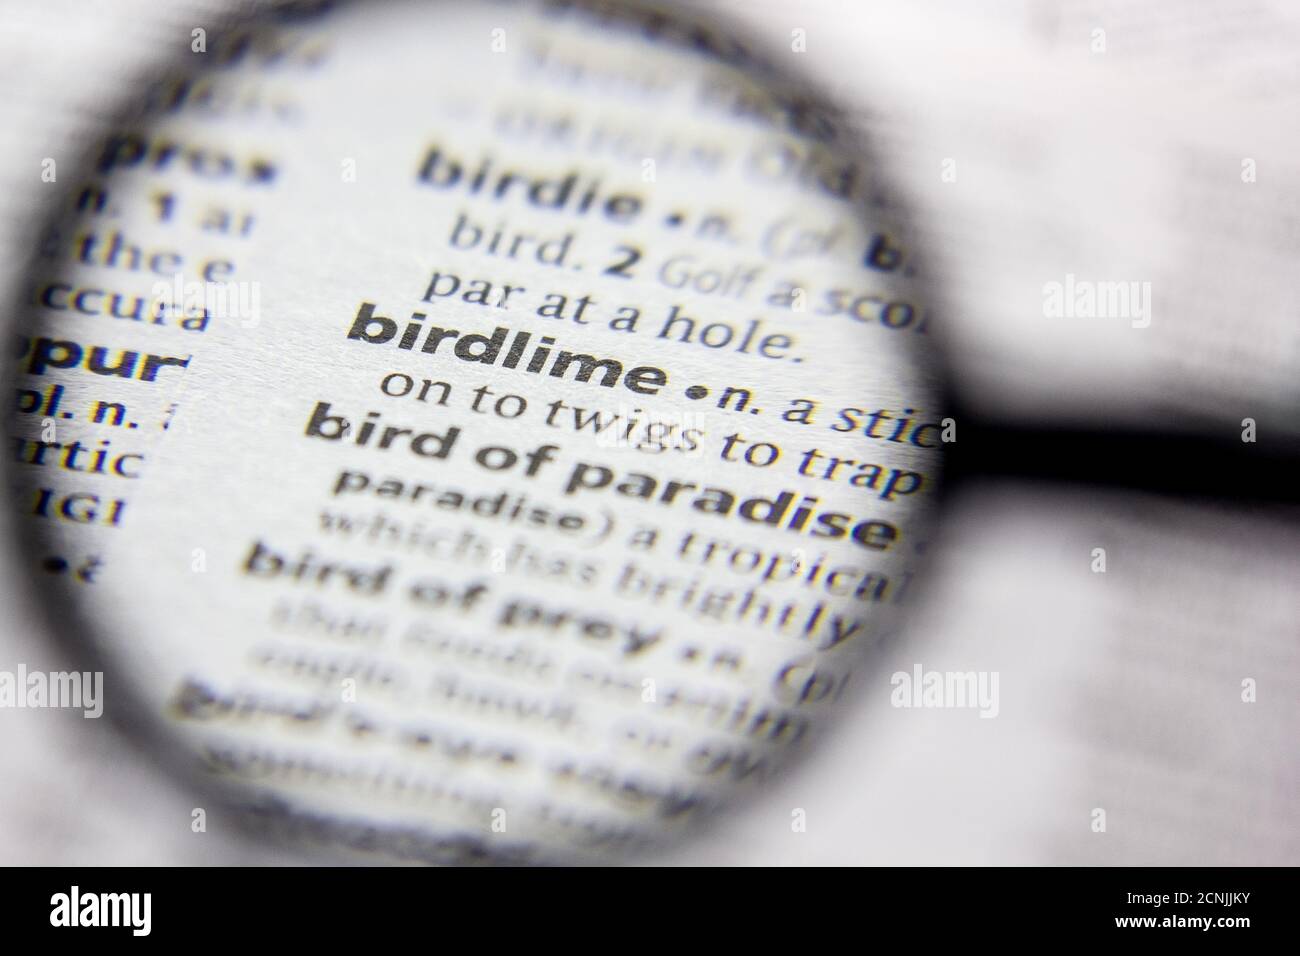 Word or phrase Birdlime in a dictionary Stock Photo